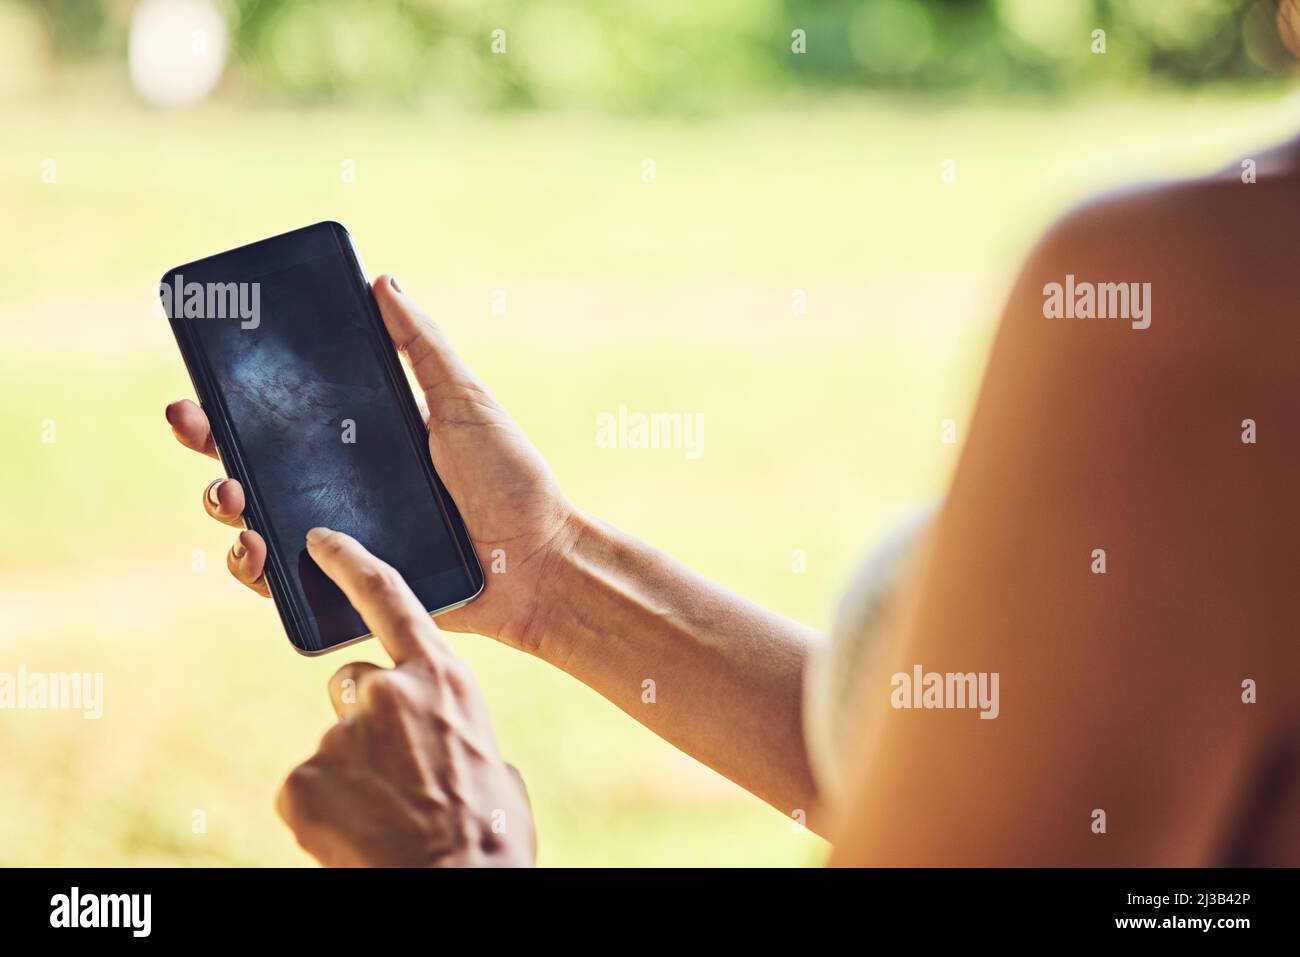 Got your device updated with the latest apps. Closeup shot of an unrecognizable woman using a cellphone outdoors. Stock Photo